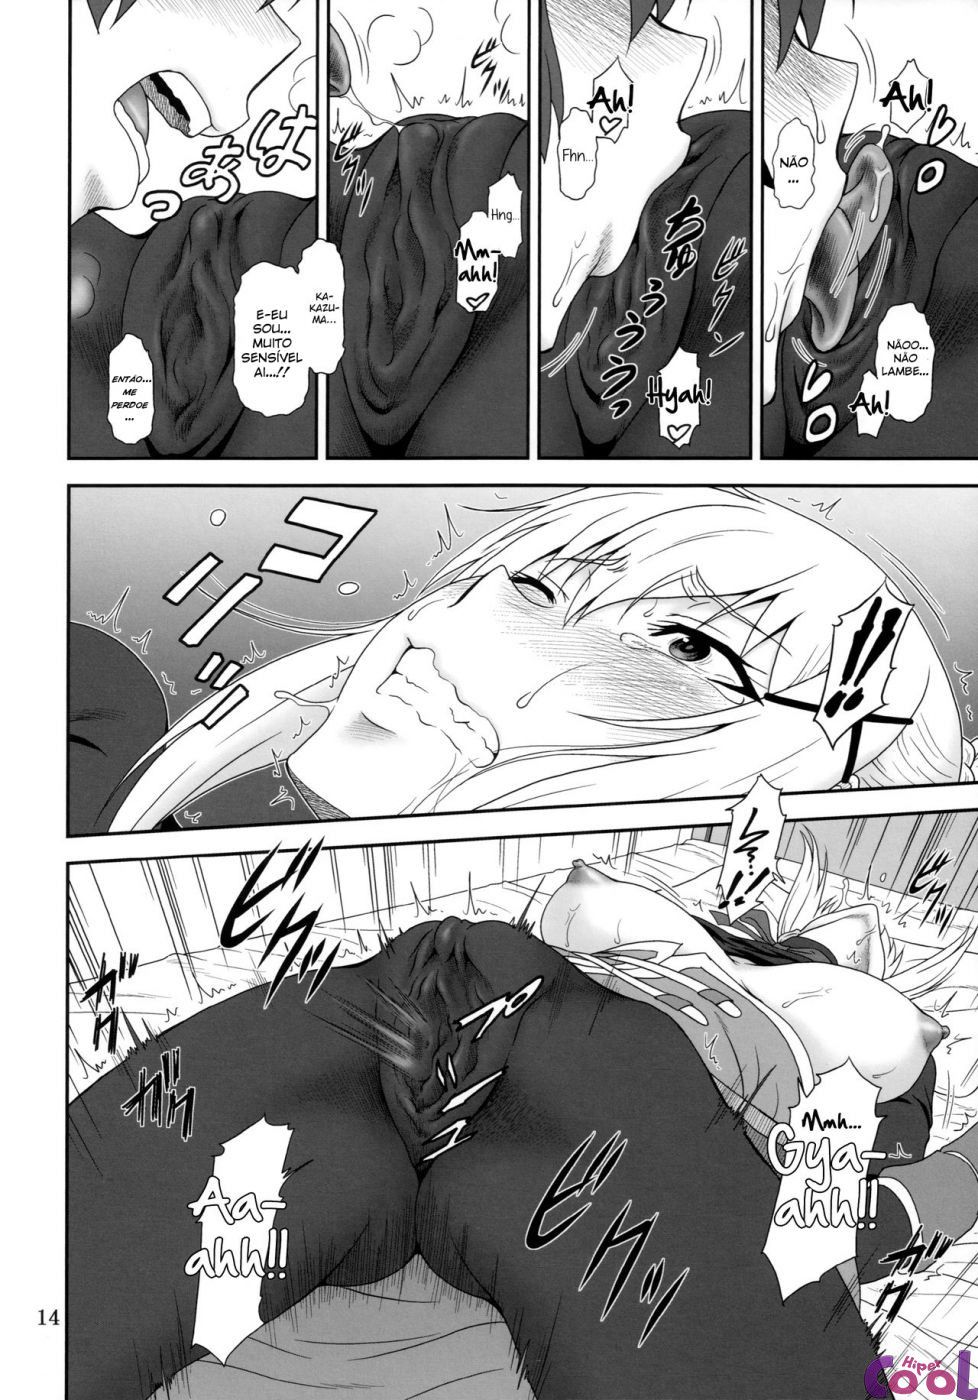 trouble-darkness-chapter-01-page-13.jpg